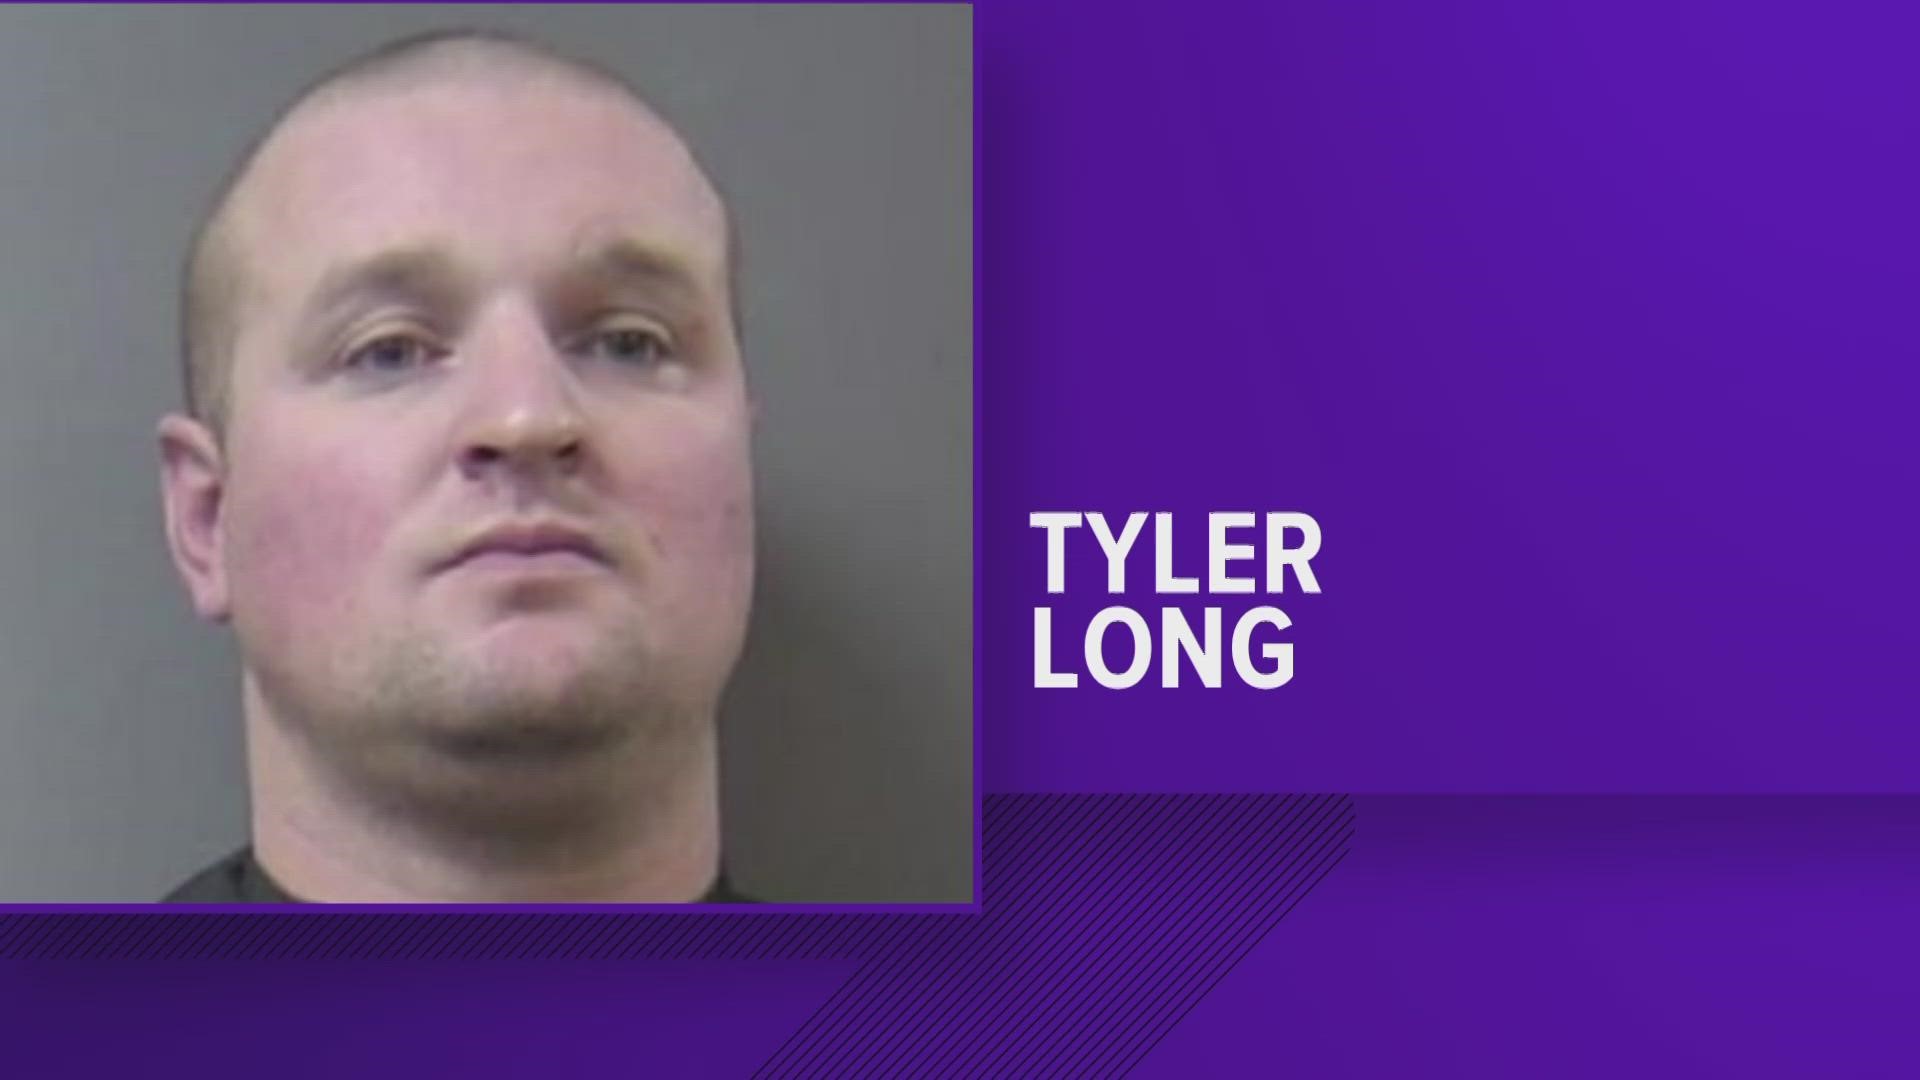 A member of the Anderson Fire Department is facing charges of battery and confinement, after a fight with his girlfriend.